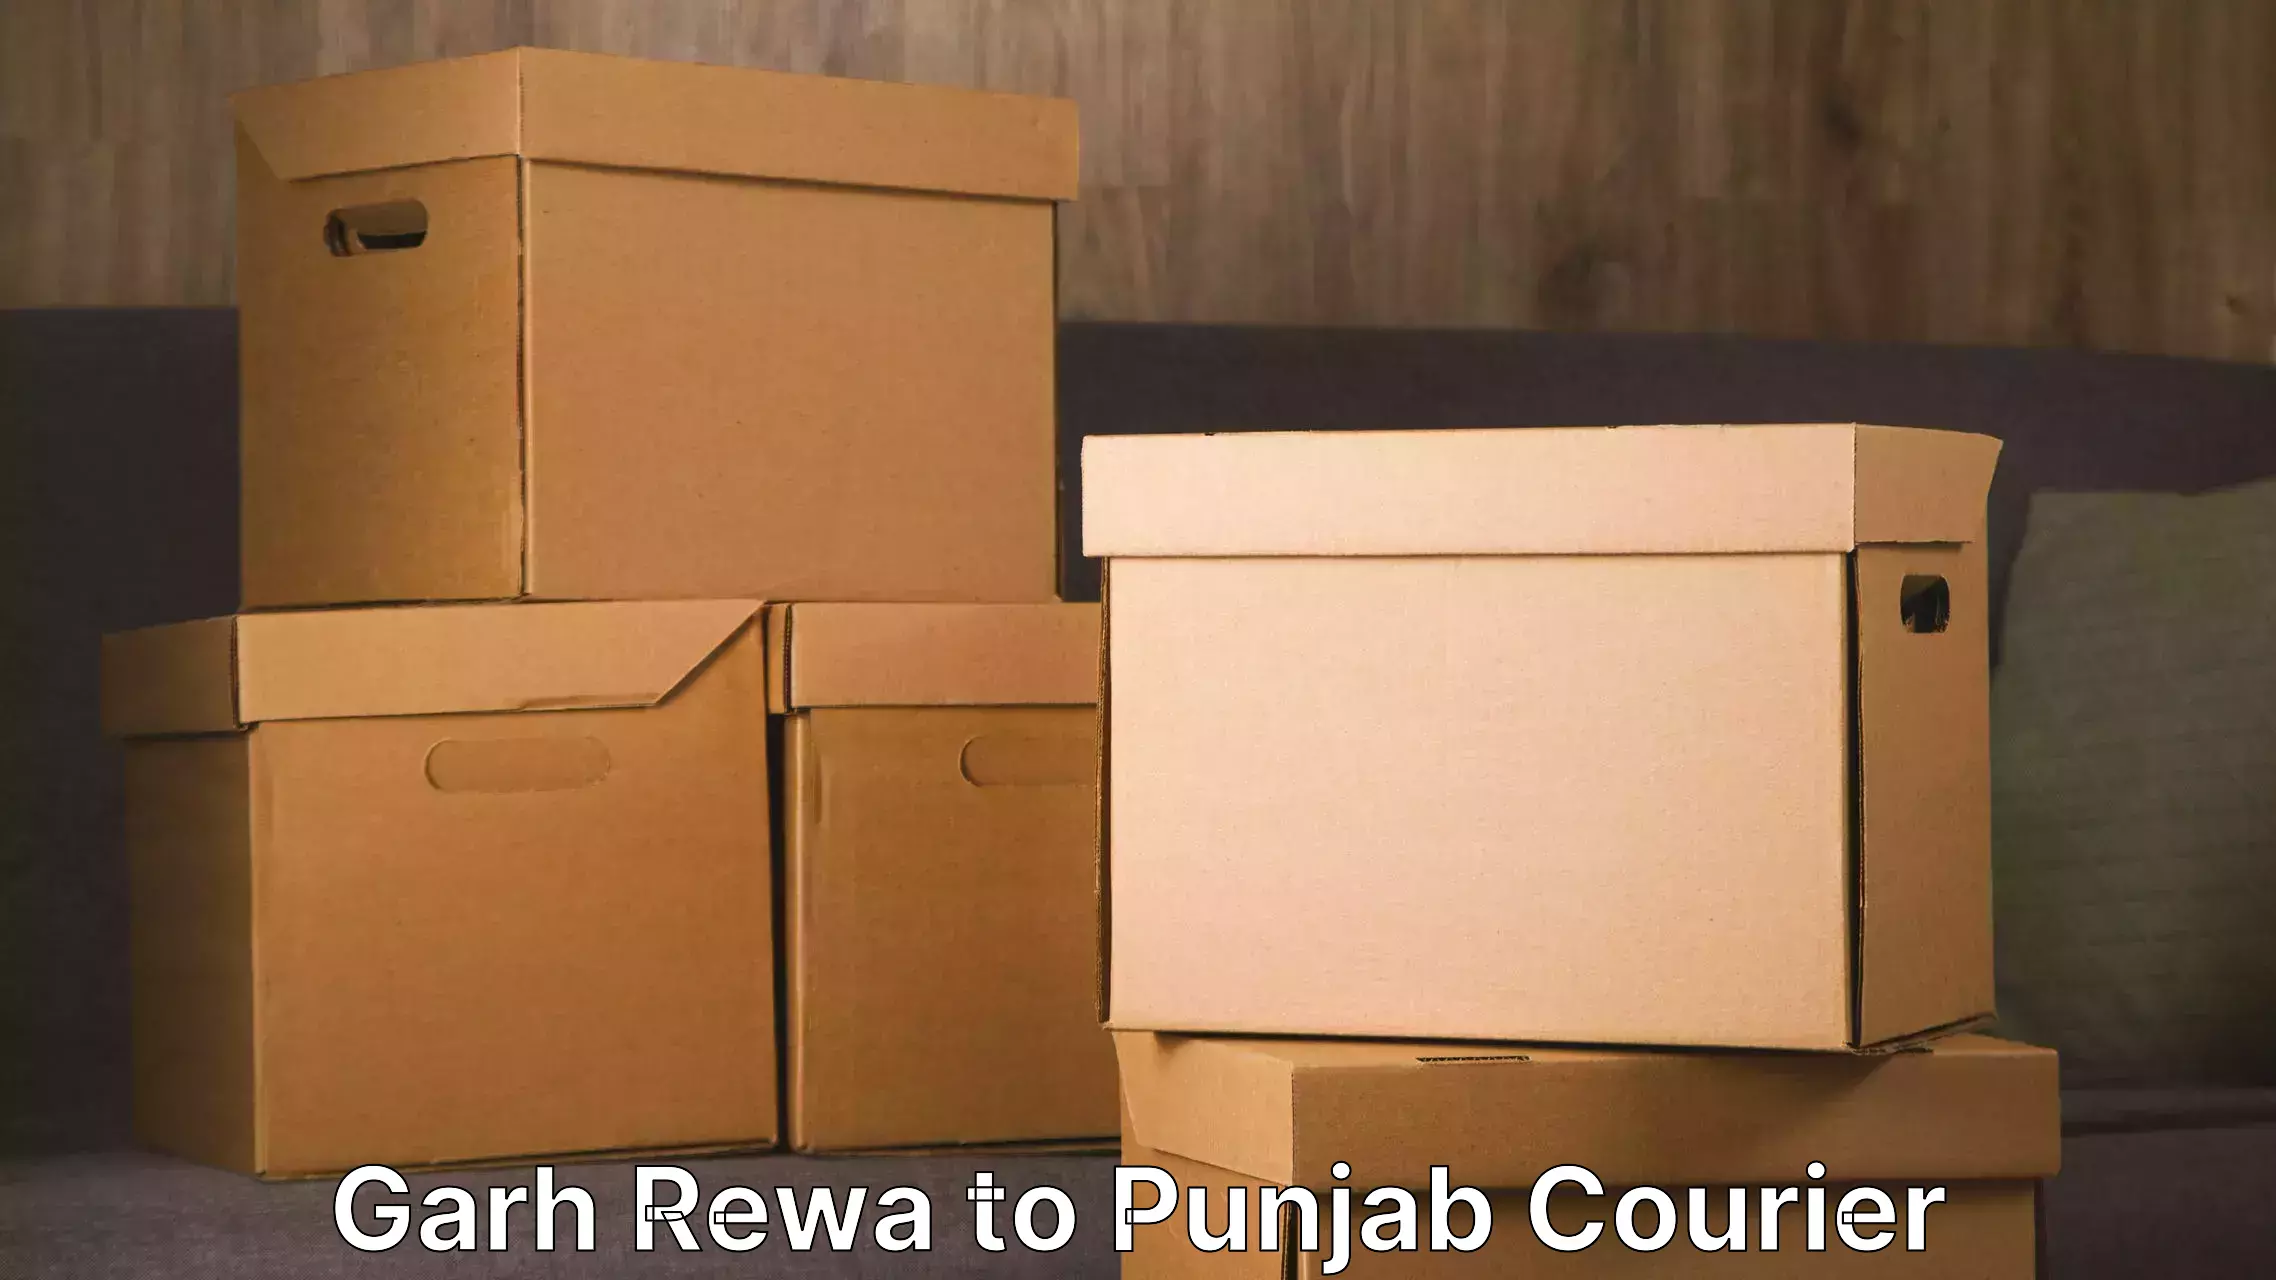 Trusted moving solutions Garh Rewa to Mohali